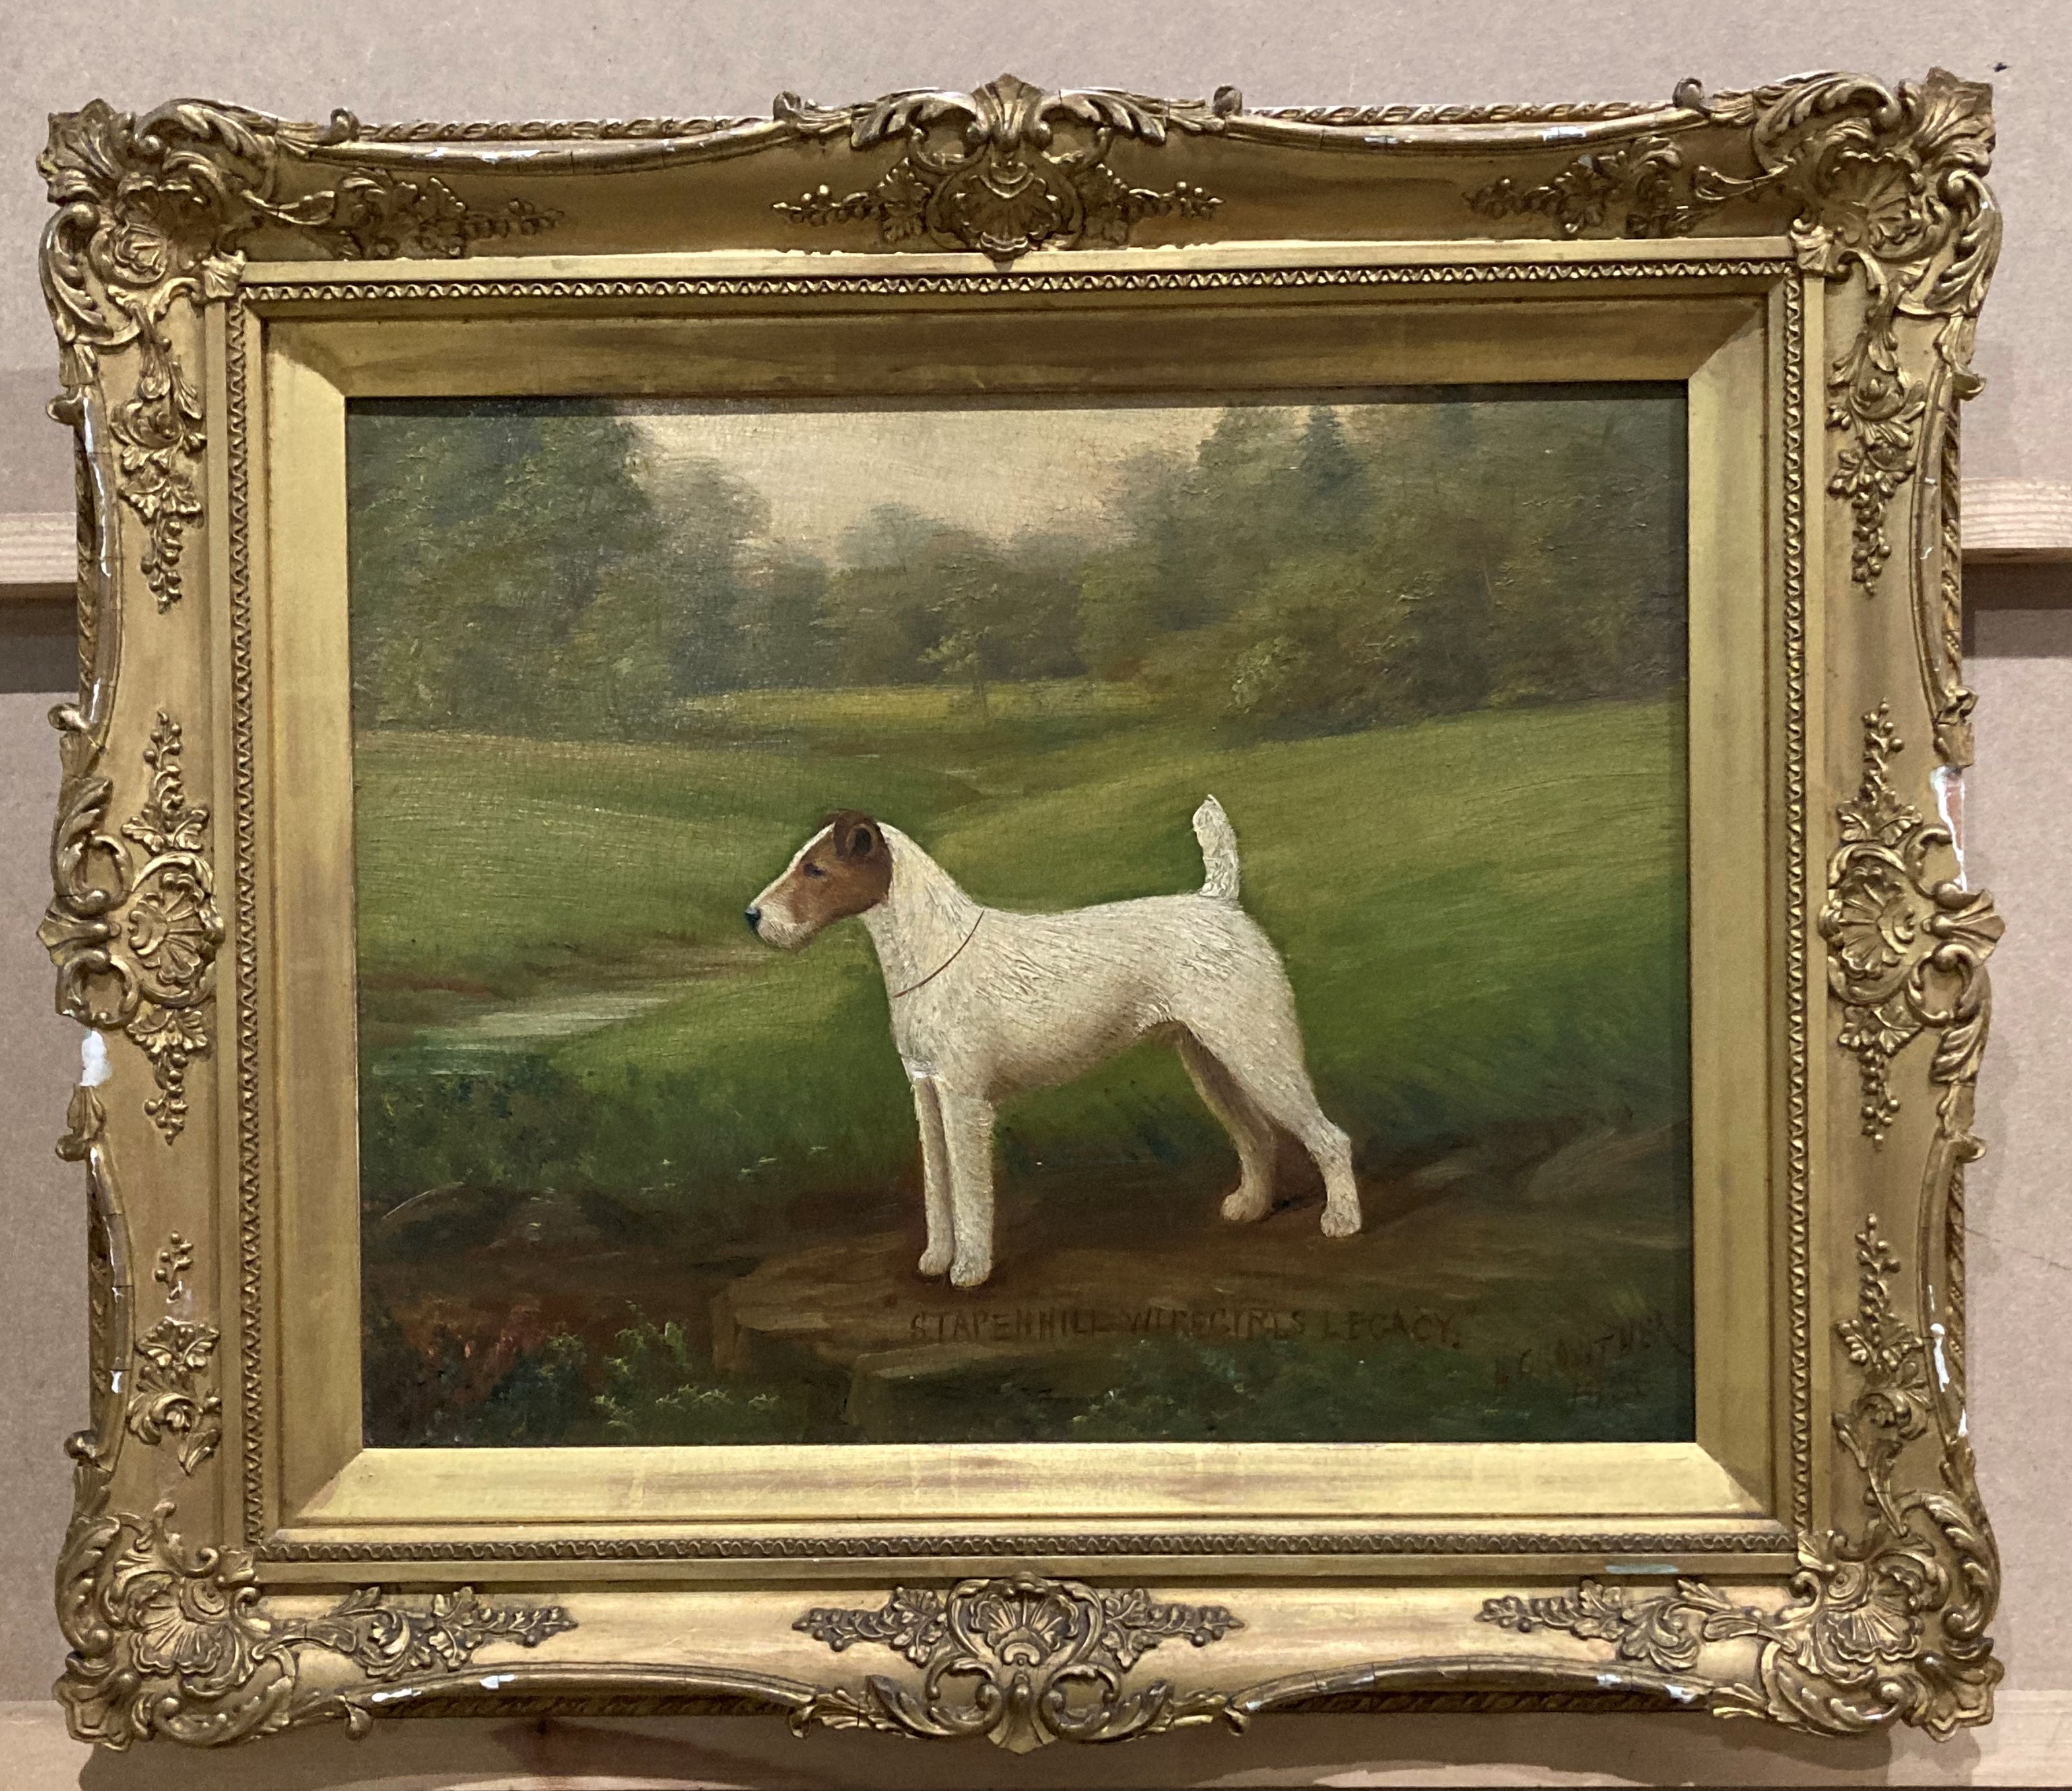 H Crowther 1923, 'Stapenhill Wiregirls Legacy', study of a fox terrier, oil on canvas, - Image 2 of 32